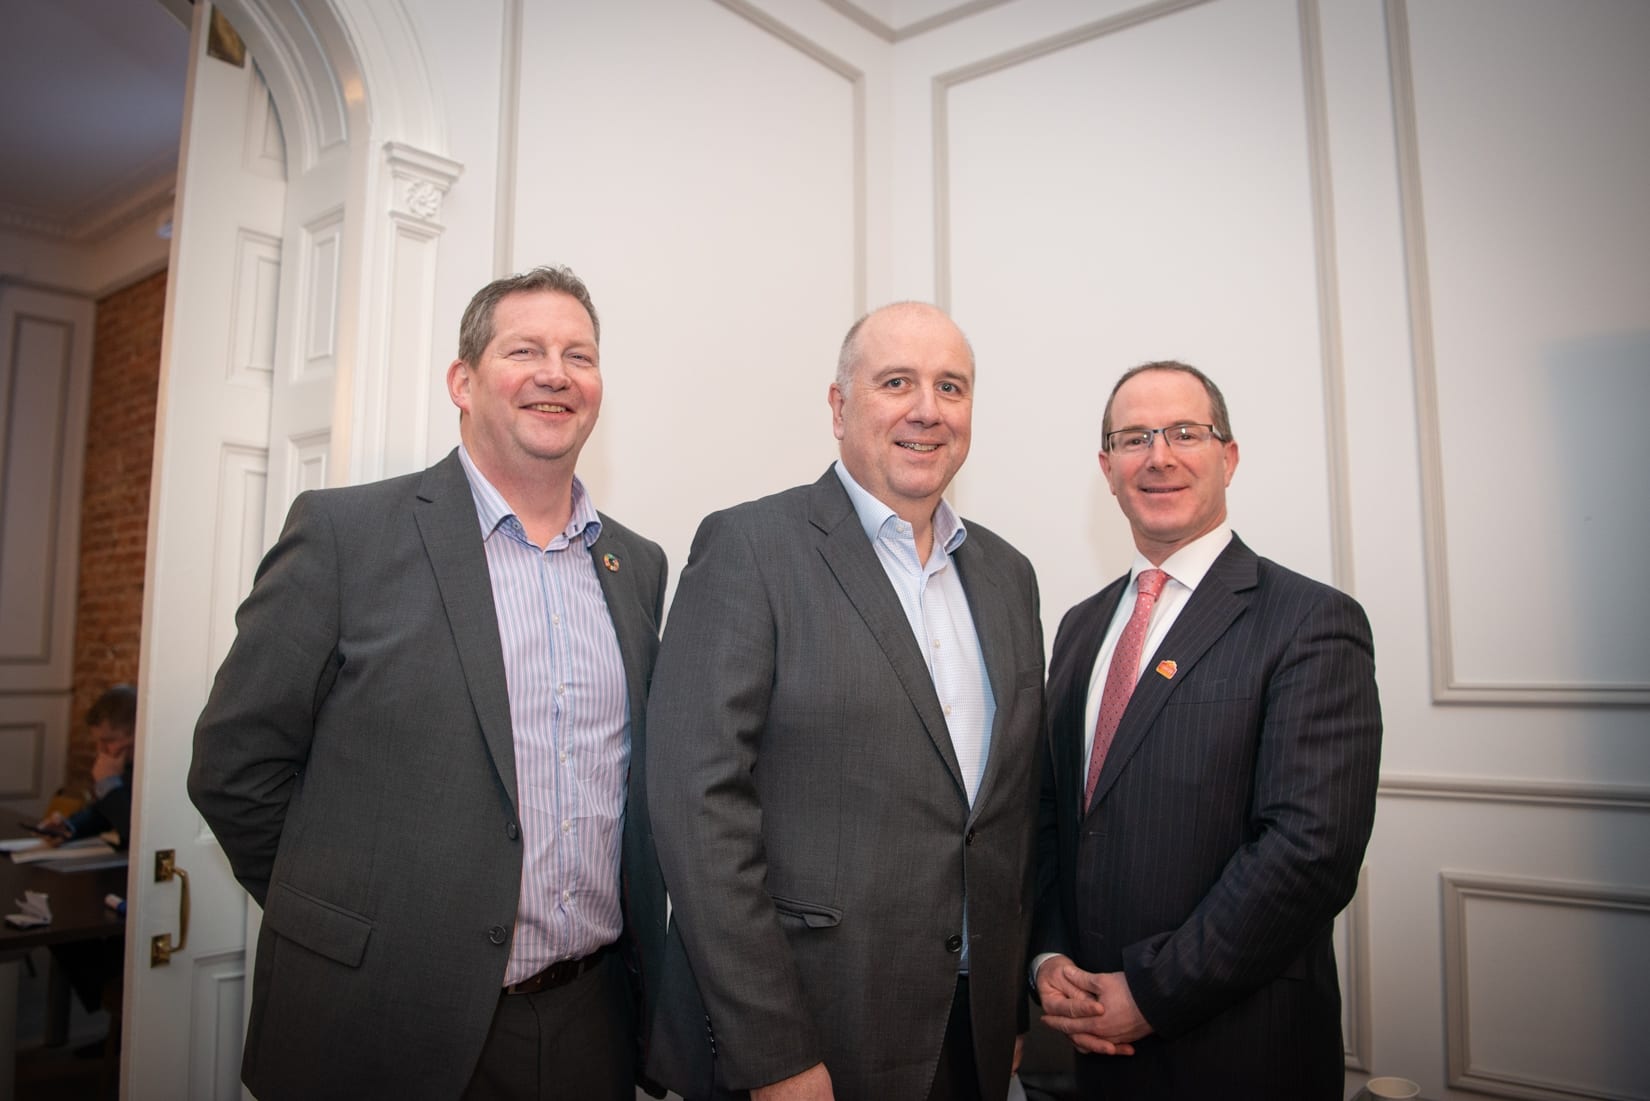 No repro fee-Limerick Chamber AGM 2020 which was held in Limerick Chamber Boardroom on Thursday 27th February - From Left to Right: De Liam Browne - Vice President LIT, Cahill Treacy - Deloitte, Gordan Kearney - Rooney Auctioneers. 
Photo credit Shauna Kennedy